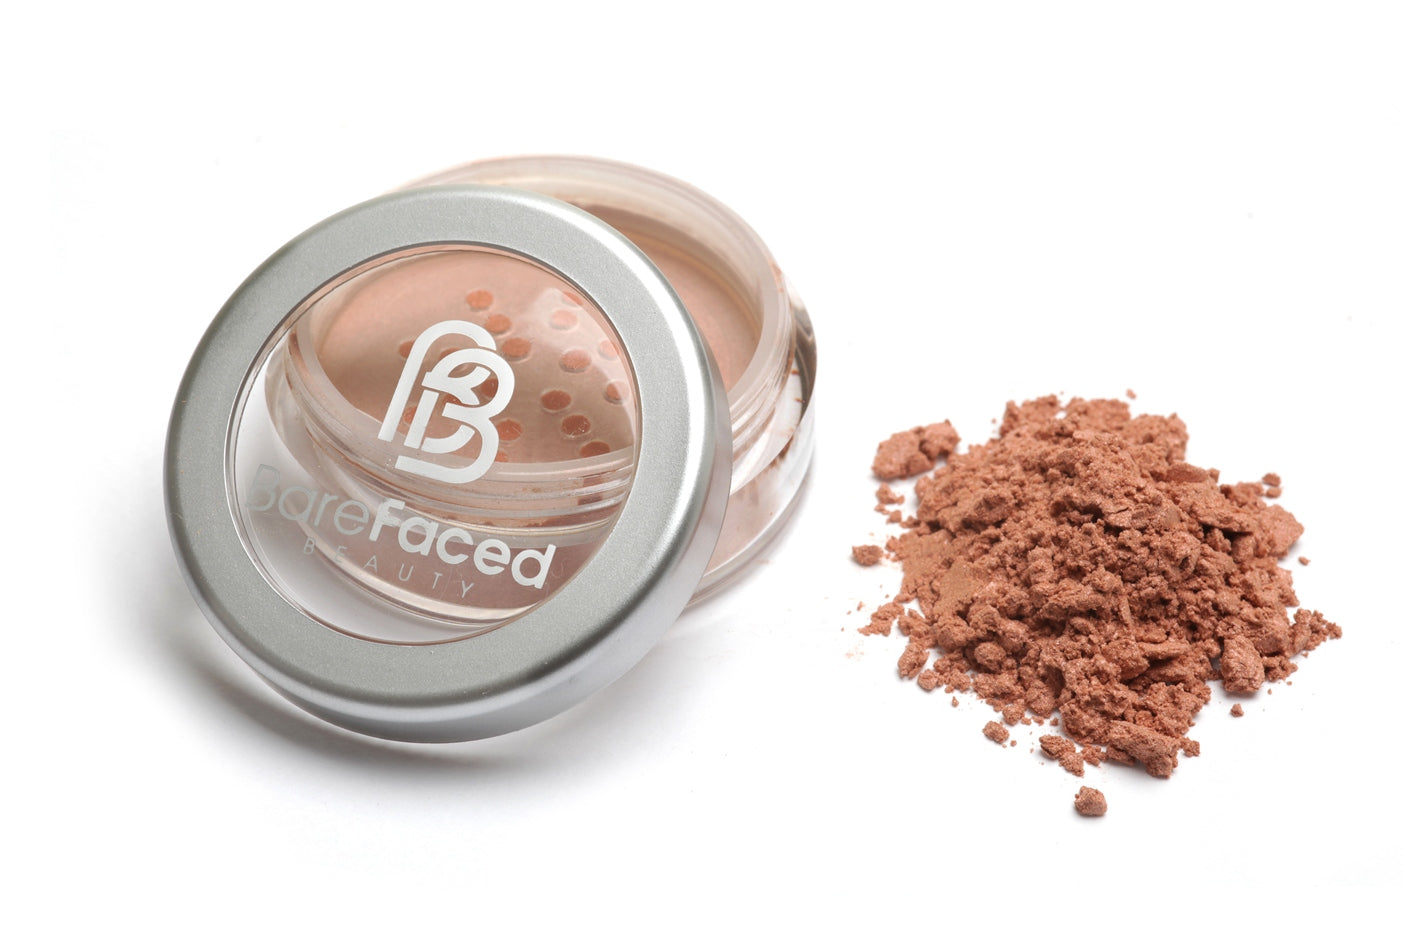 A small round pot of mineral blusher, with a swatch of the powder next to it showing a subtle satin, apricot shade